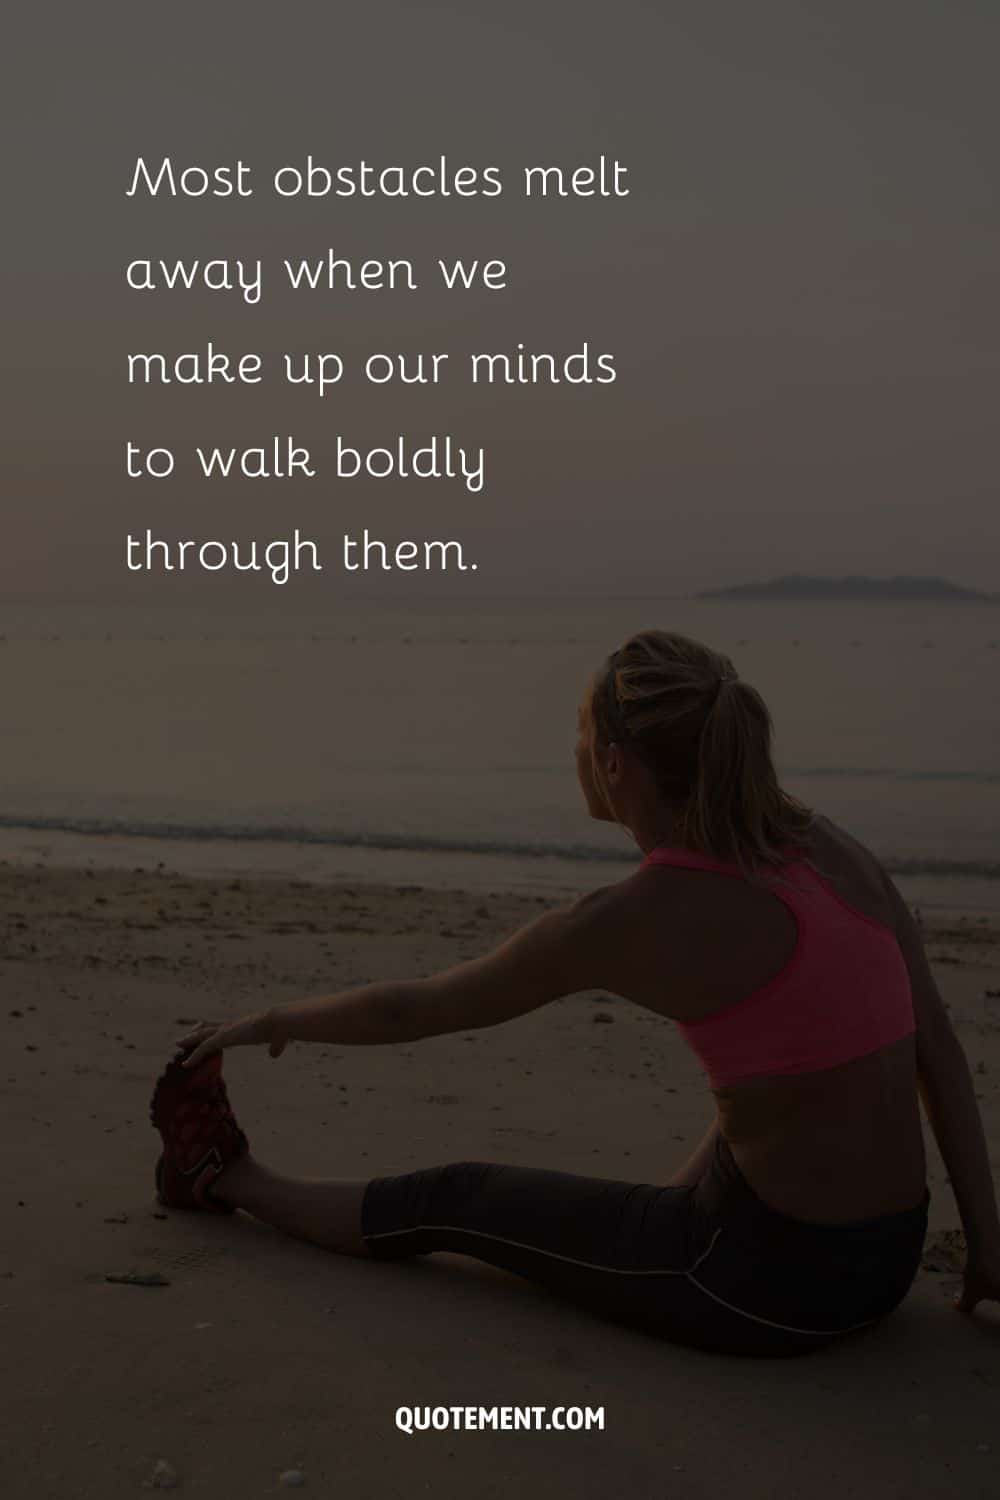 Most obstacles melt away when we make up our minds to walk boldly through them